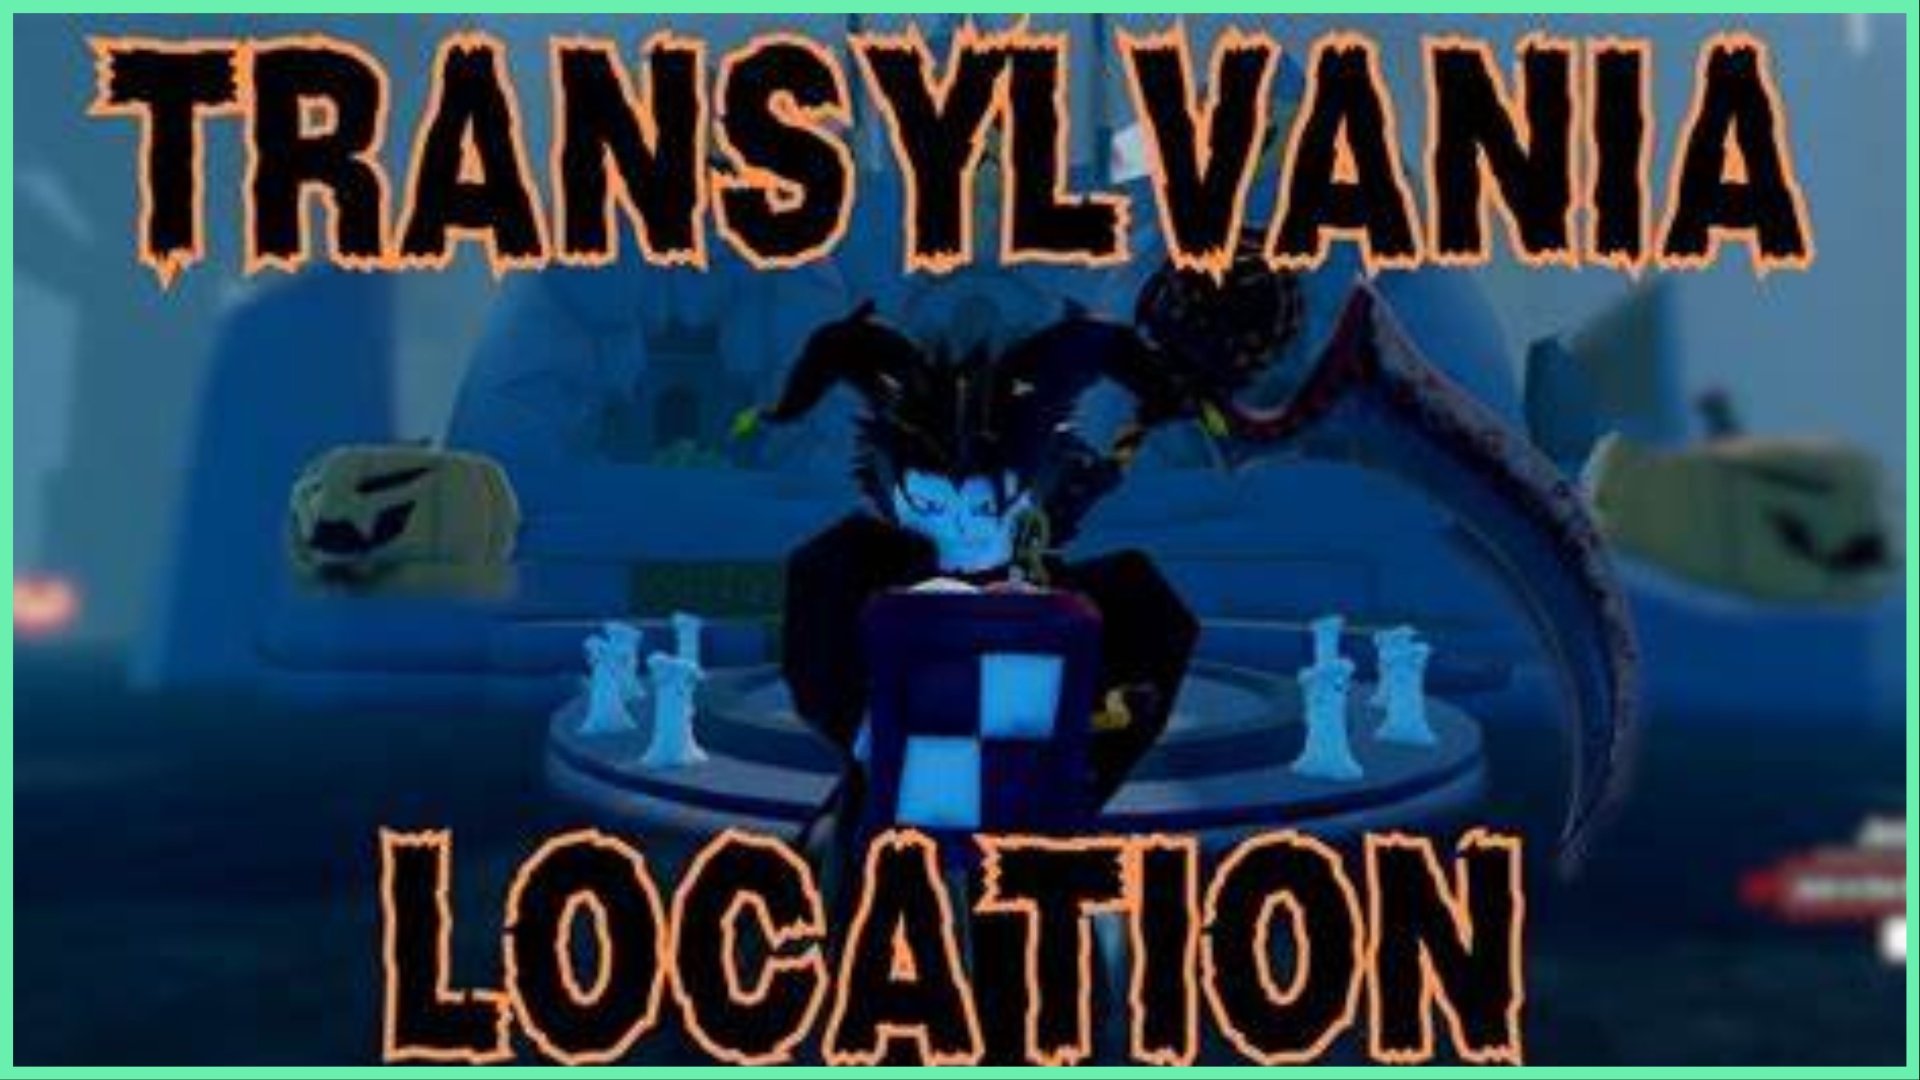 the image shows an avatar with a jester hat facing the viewer with arms folded. In spooky text in black with squiggly orange highlights is the text "Transylvania location"